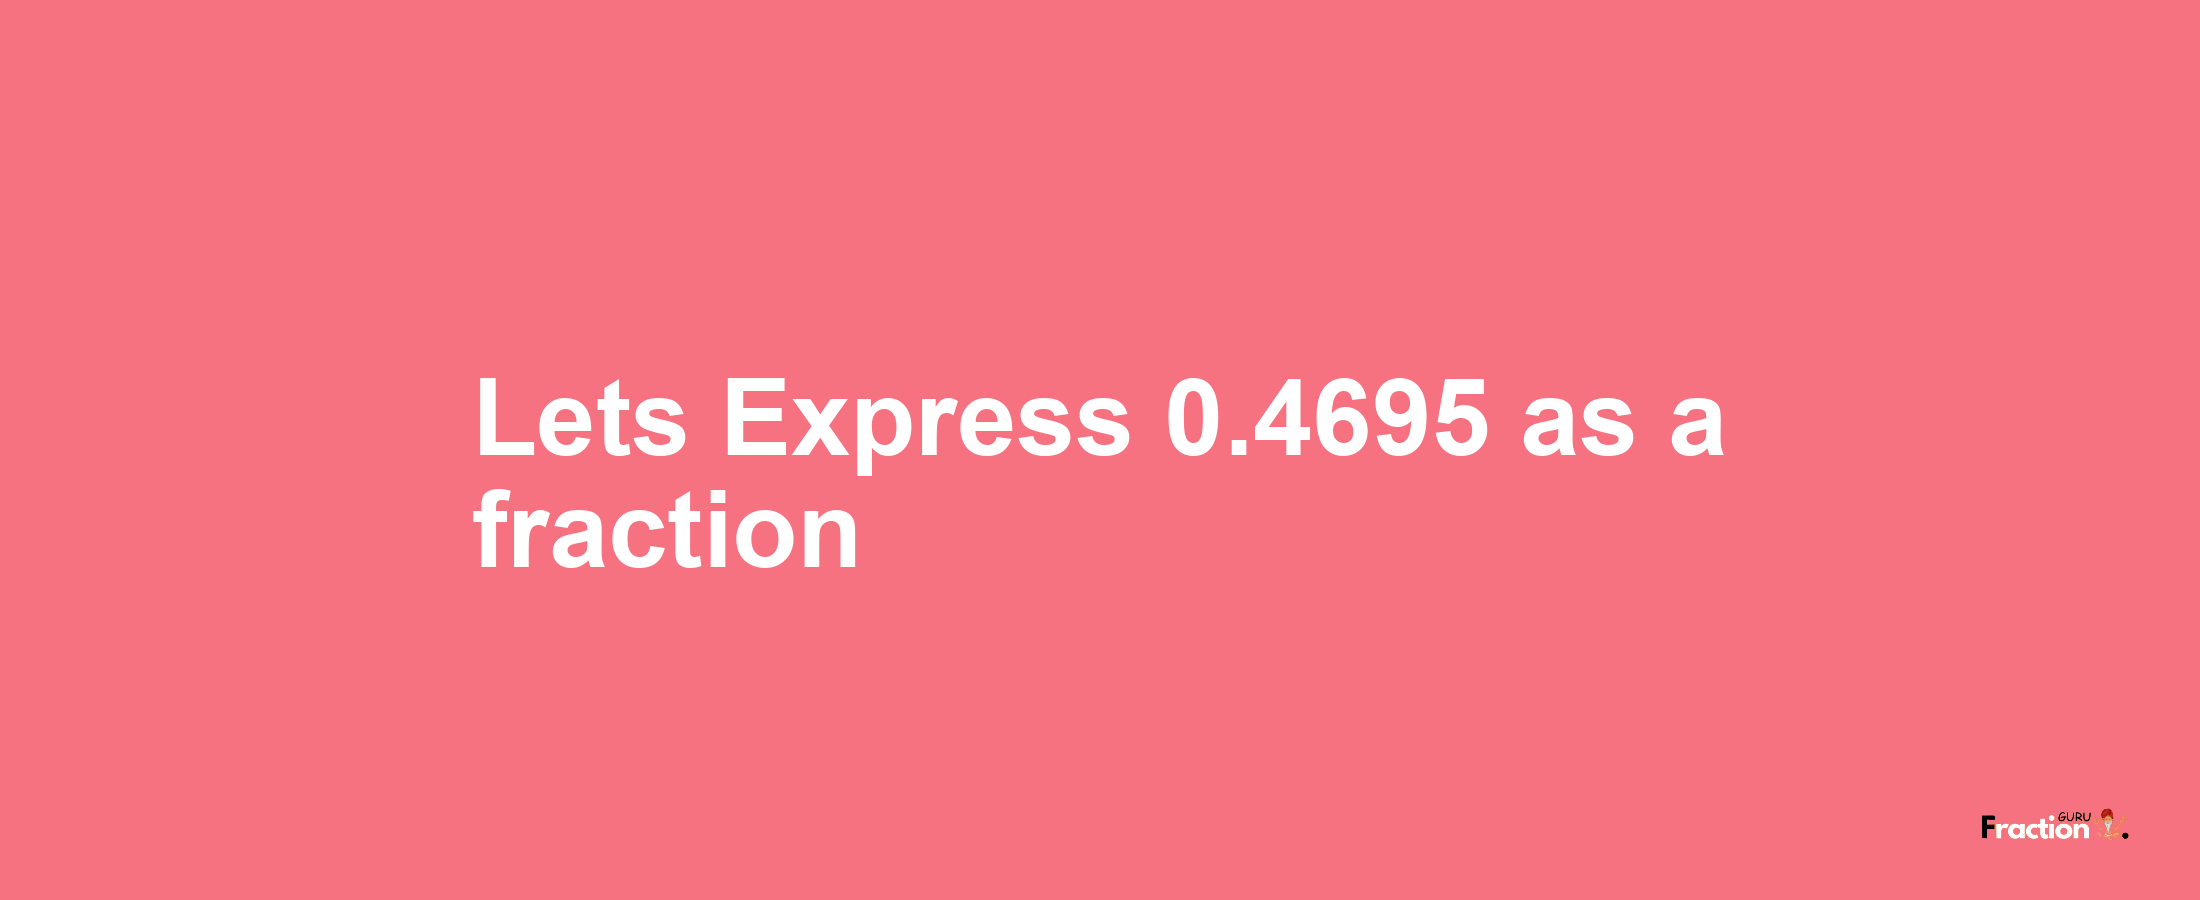 Lets Express 0.4695 as afraction